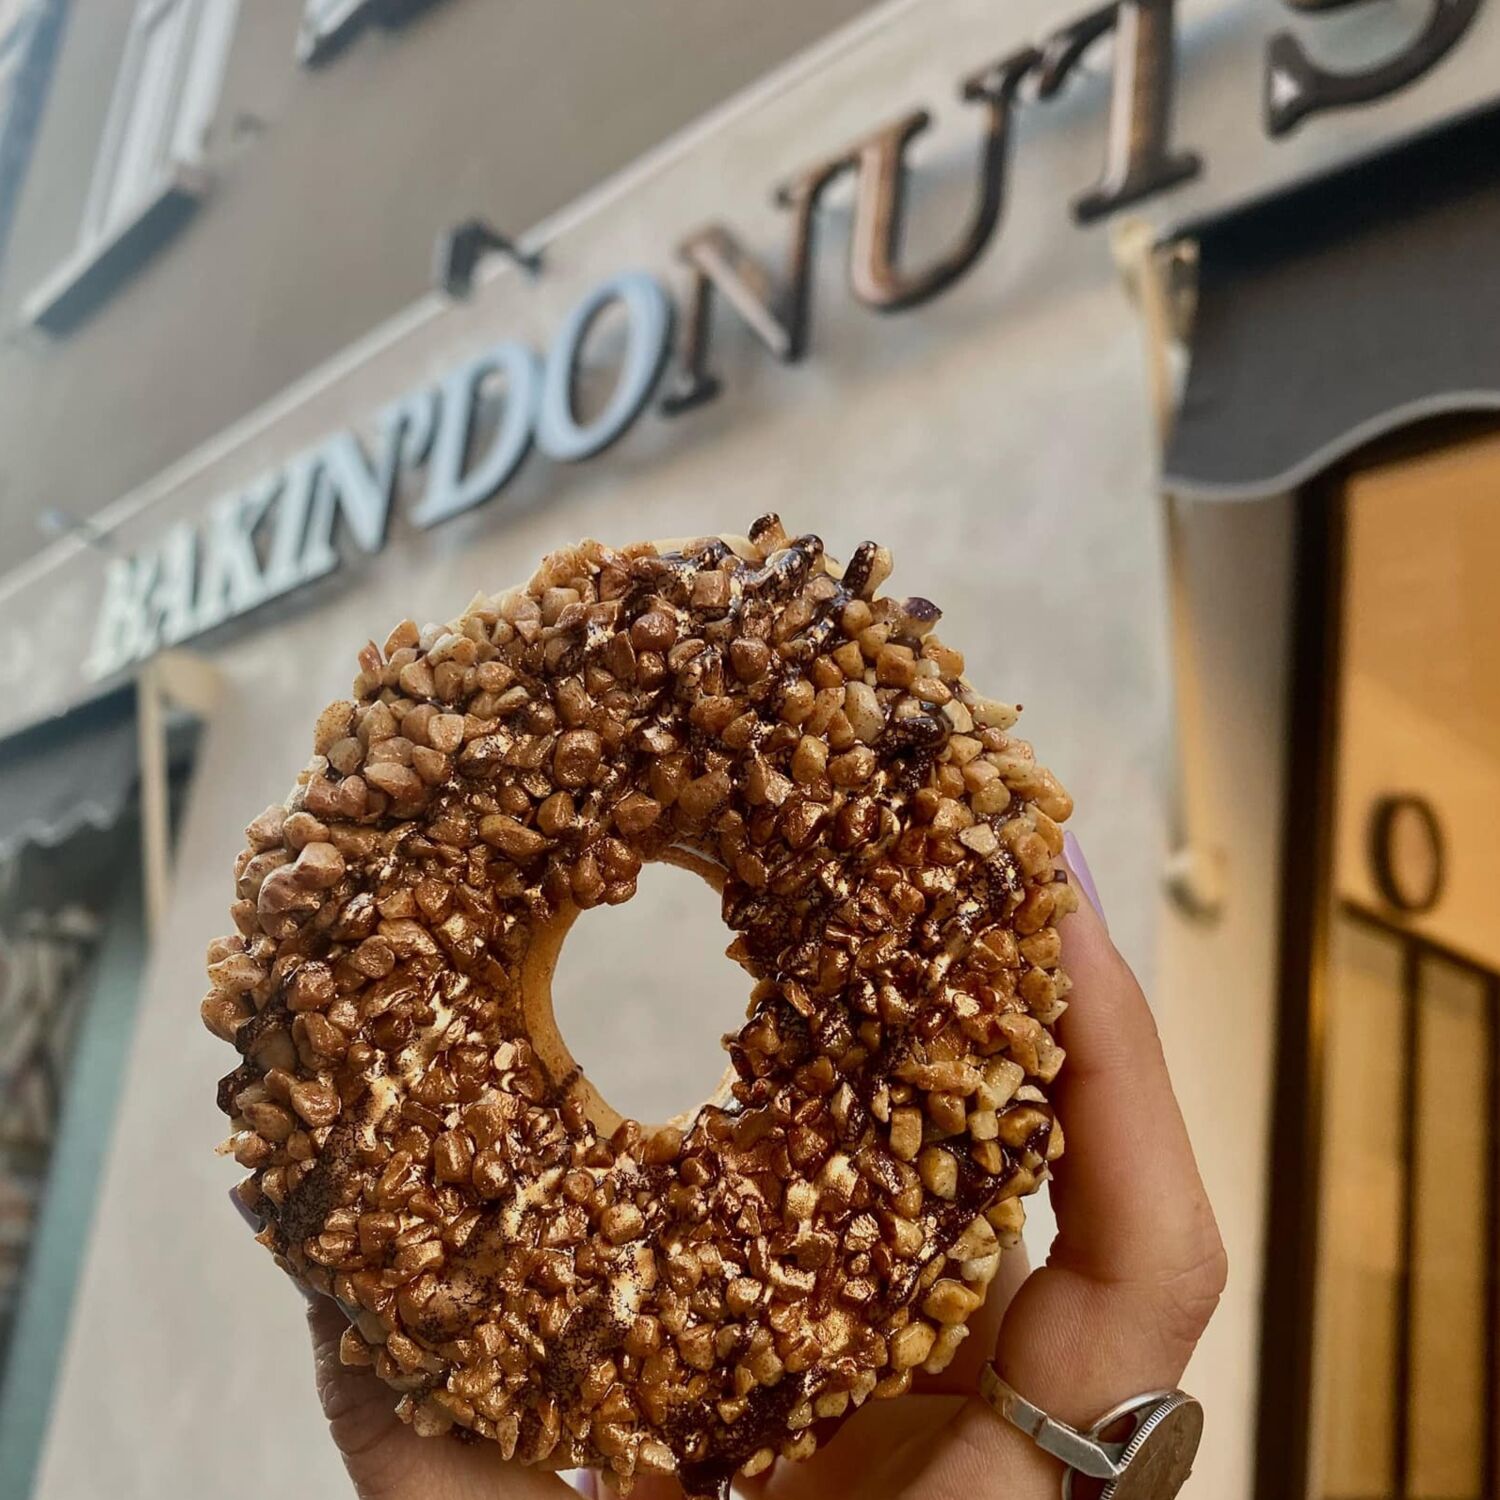 Bakin’Donuts : le made in France s'installe à Rouen